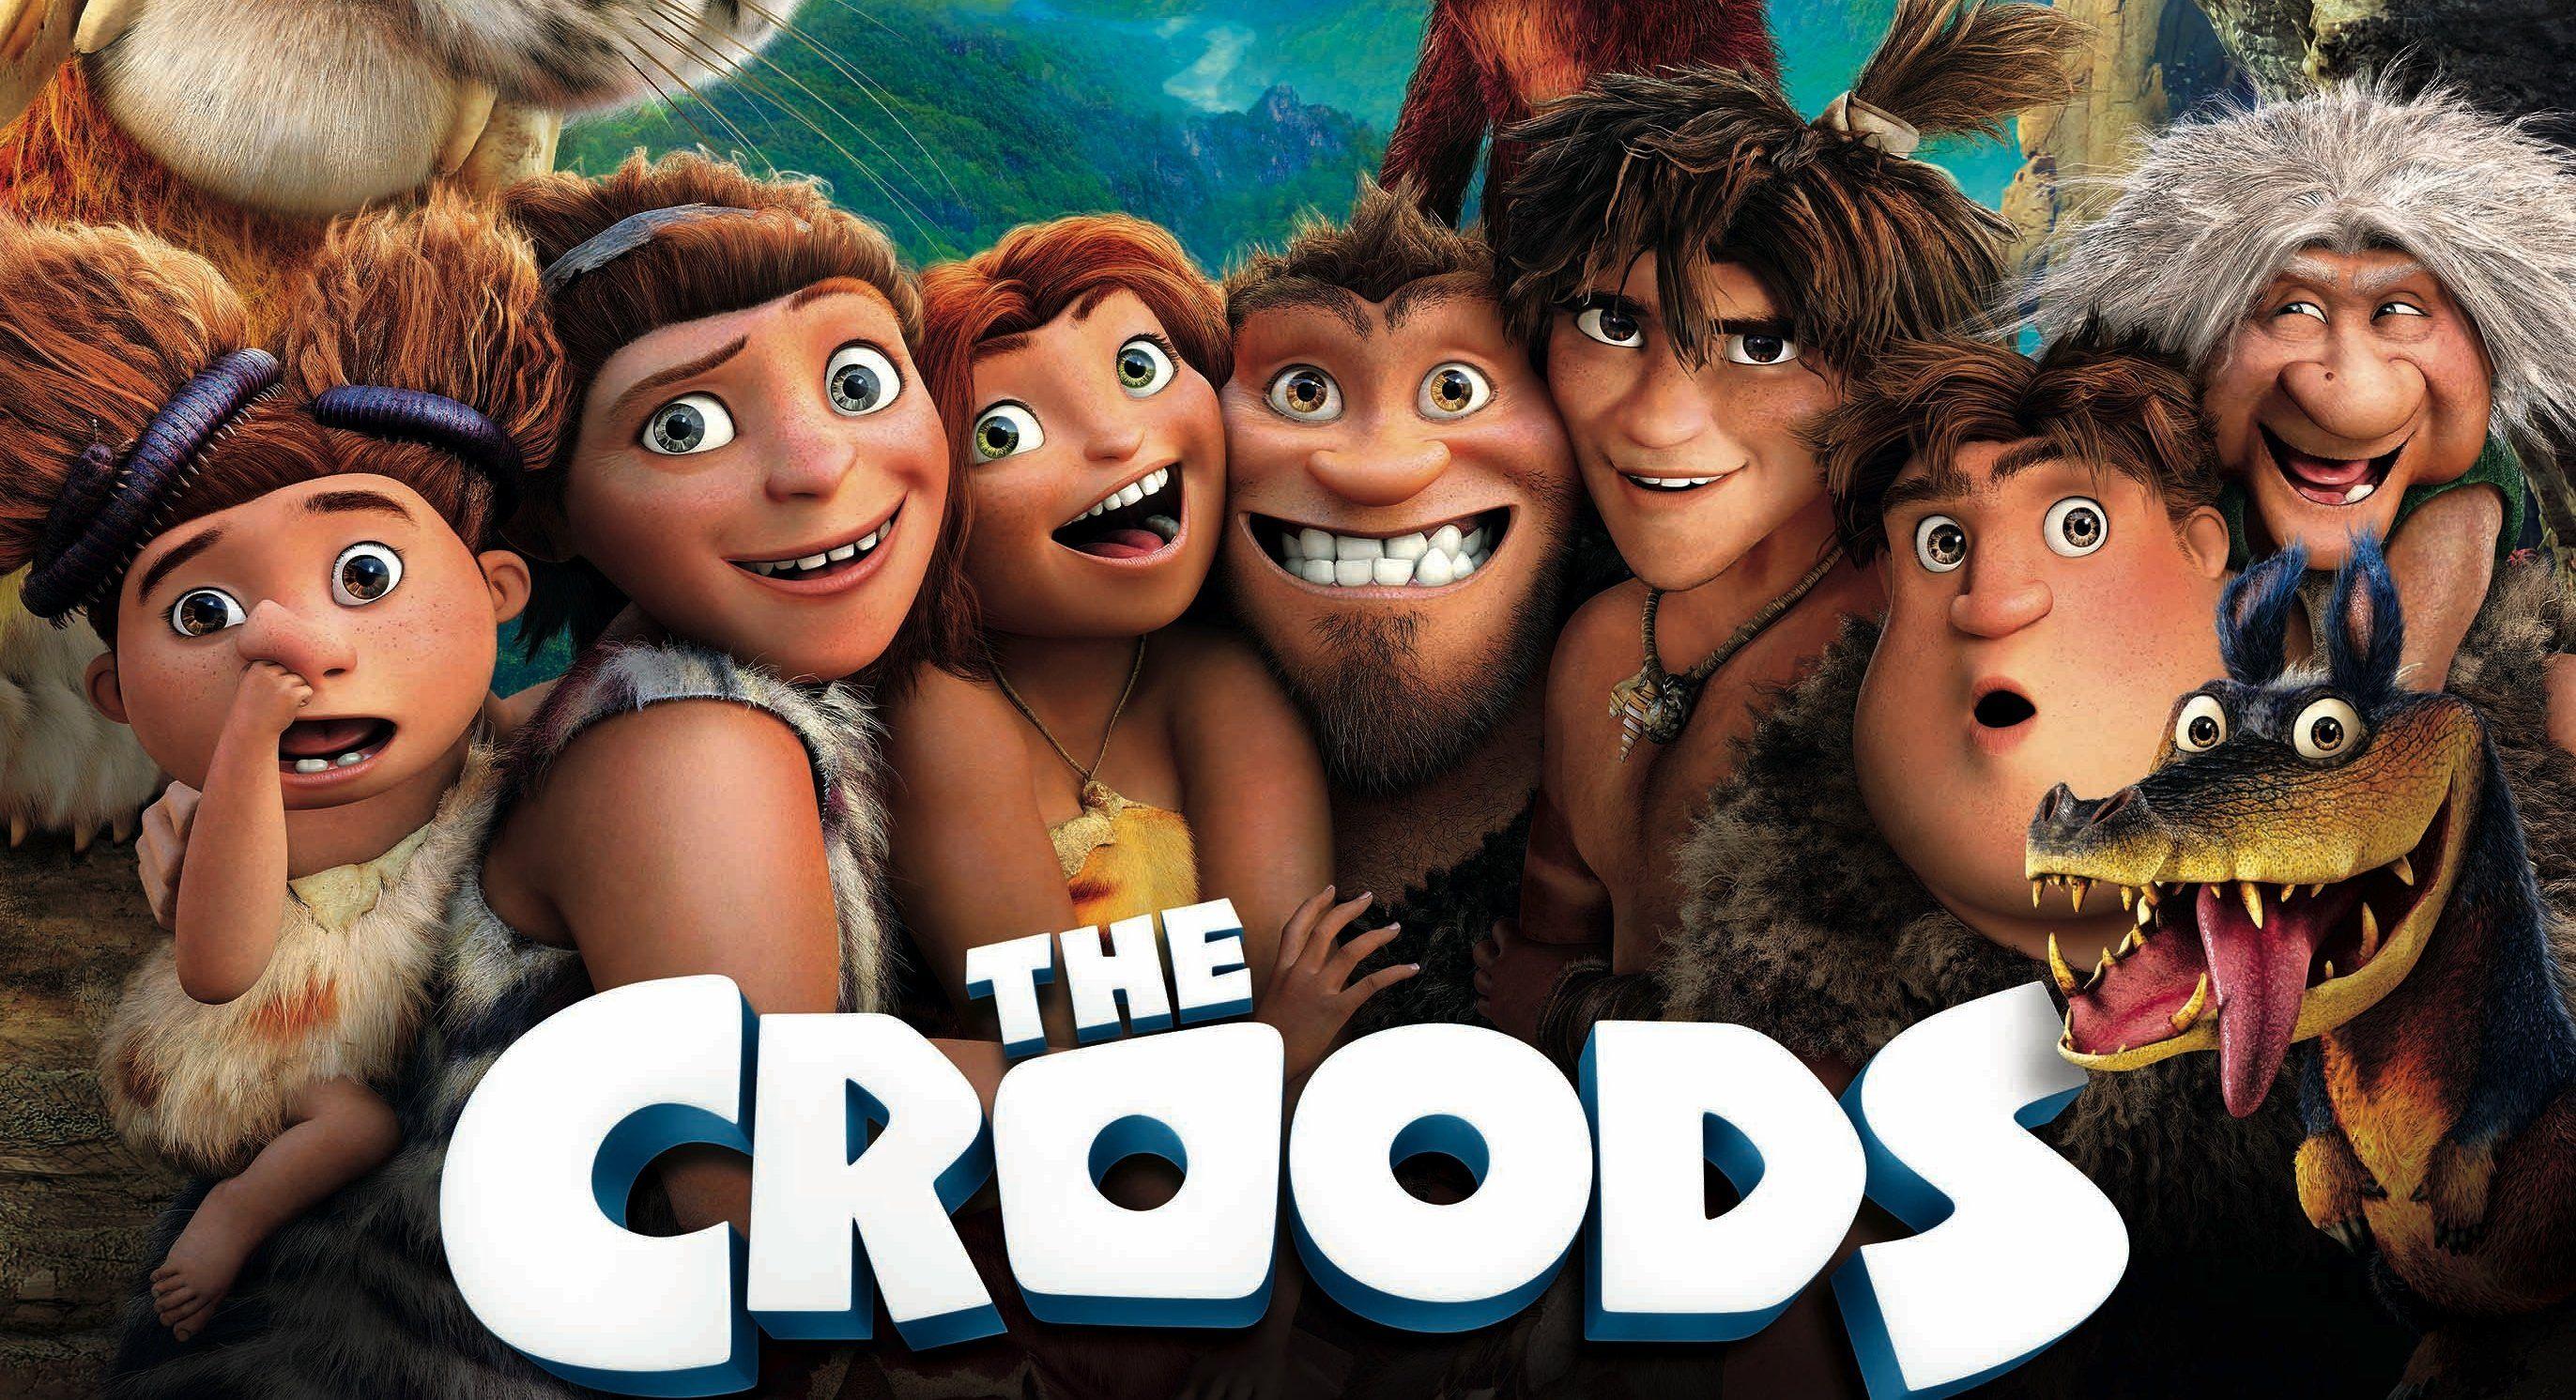 The Croods 2 Wallpapers - Top Free The Croods 2 Backgrounds ...